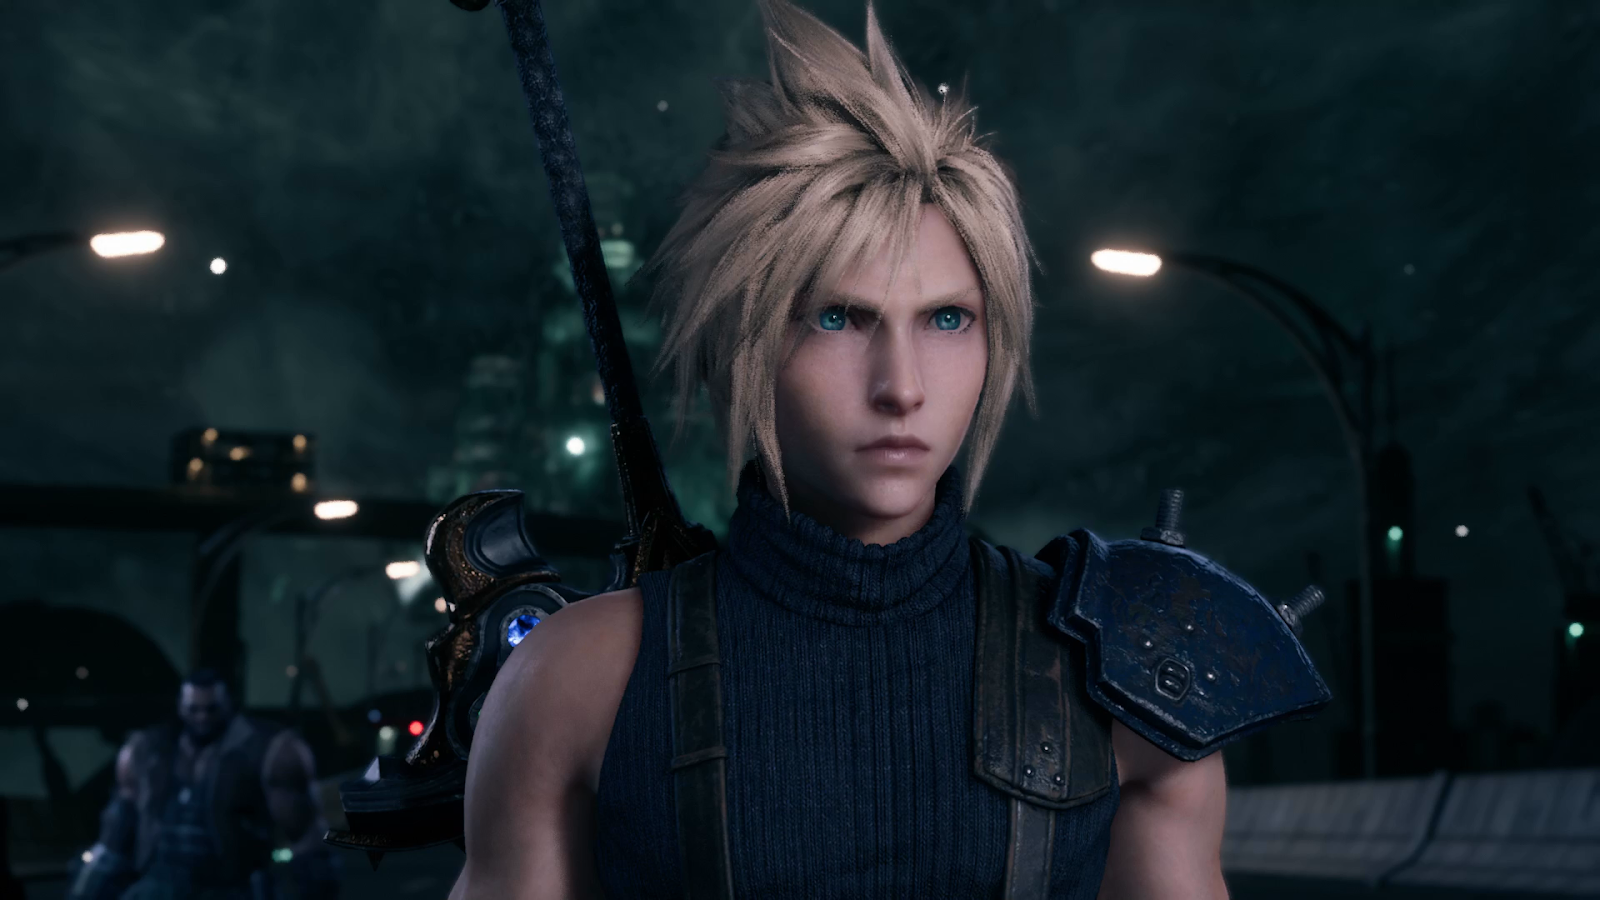 Final Fantasy VII Remake Is Haunted By What Came Before